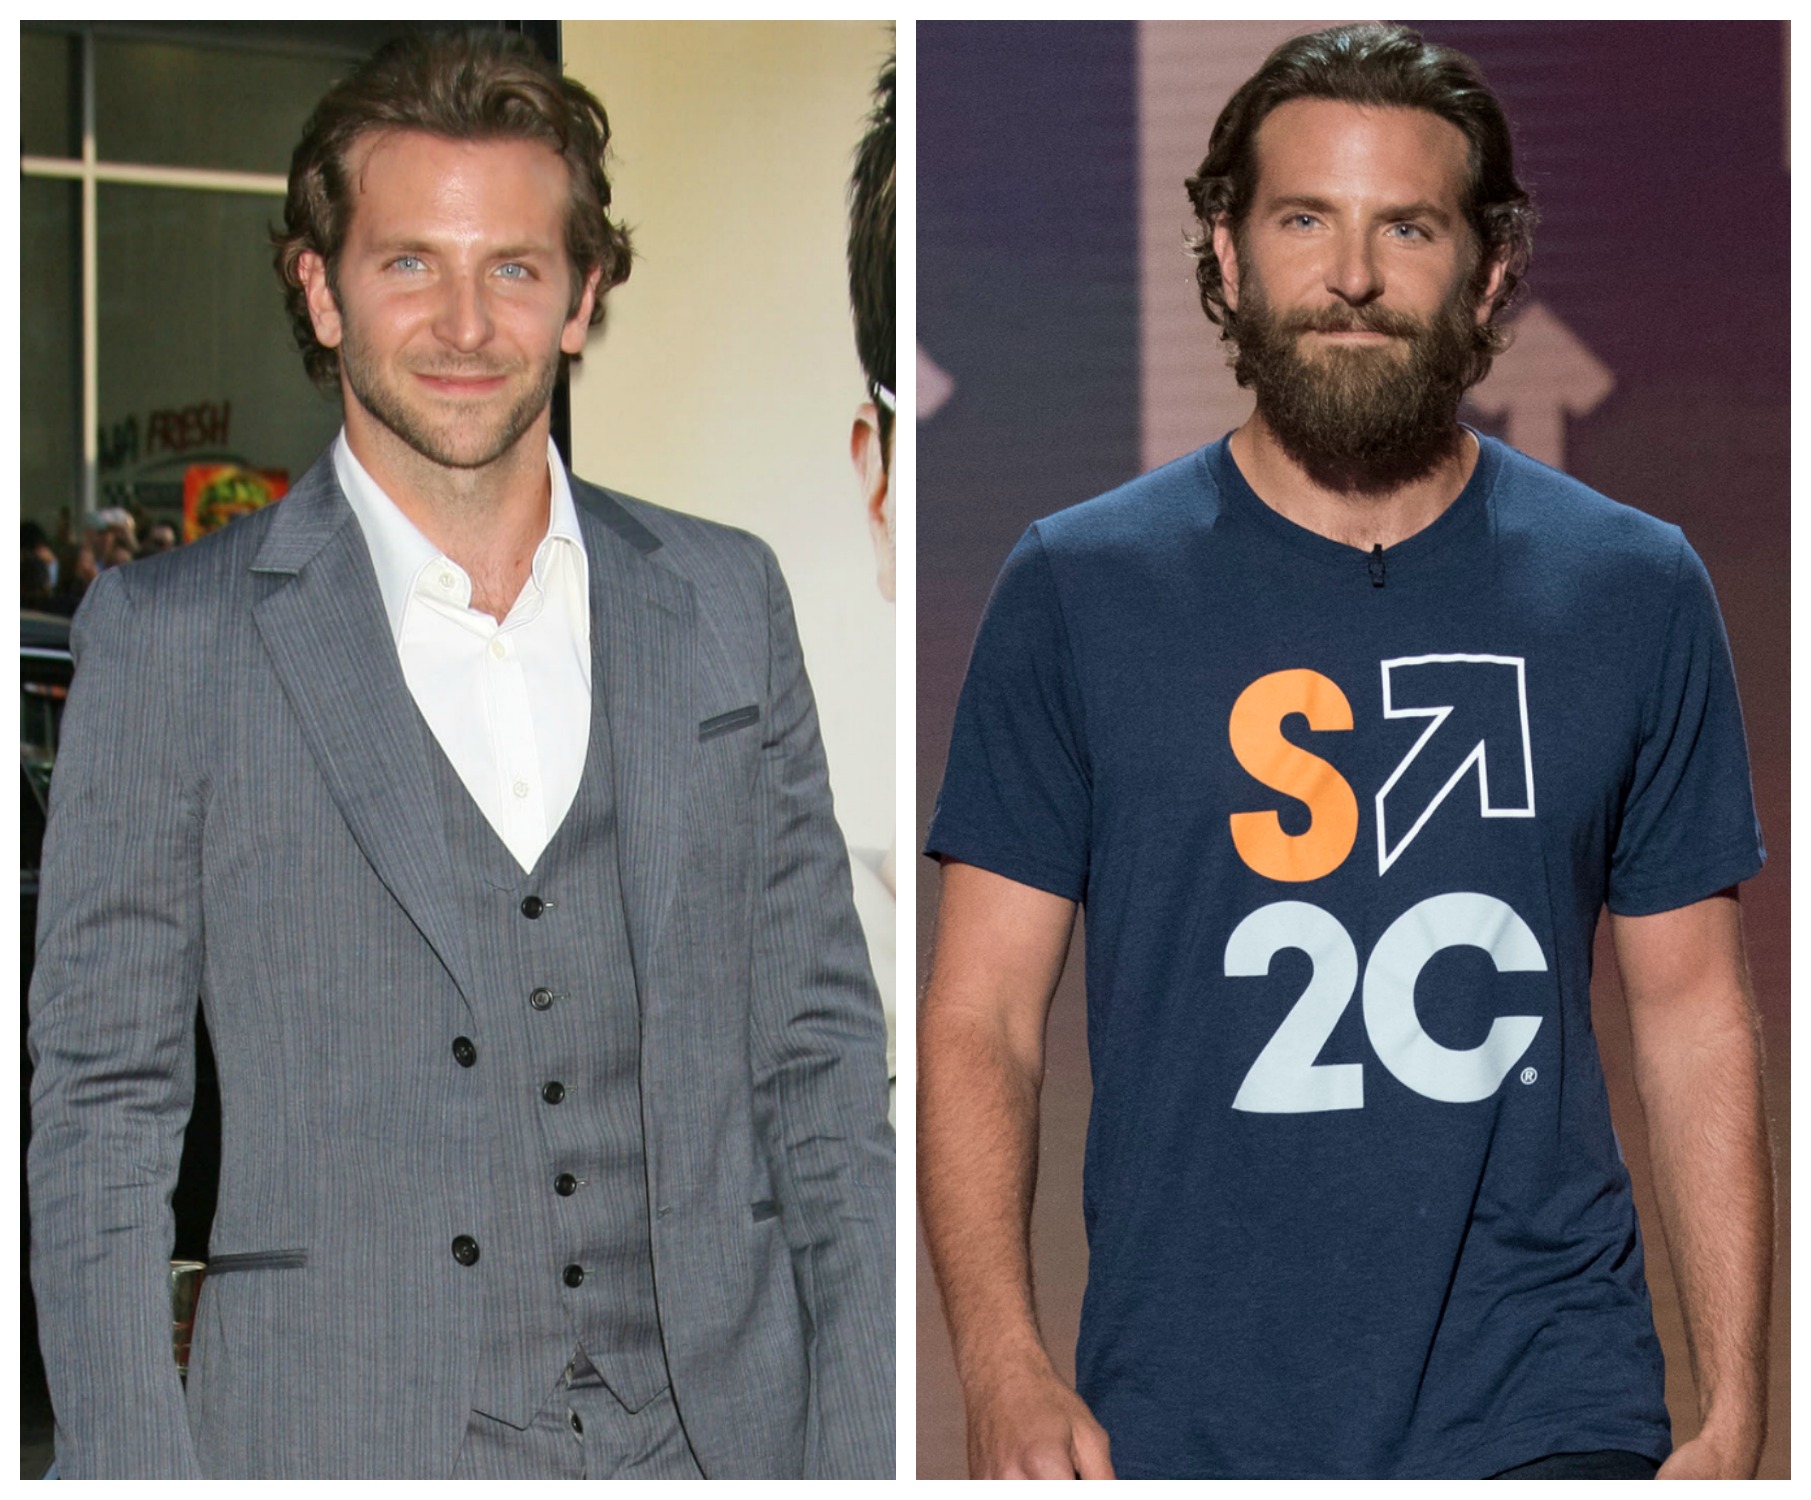 PHOTOS: 'the Hangover' Stars: Where Are They Now Years Later?